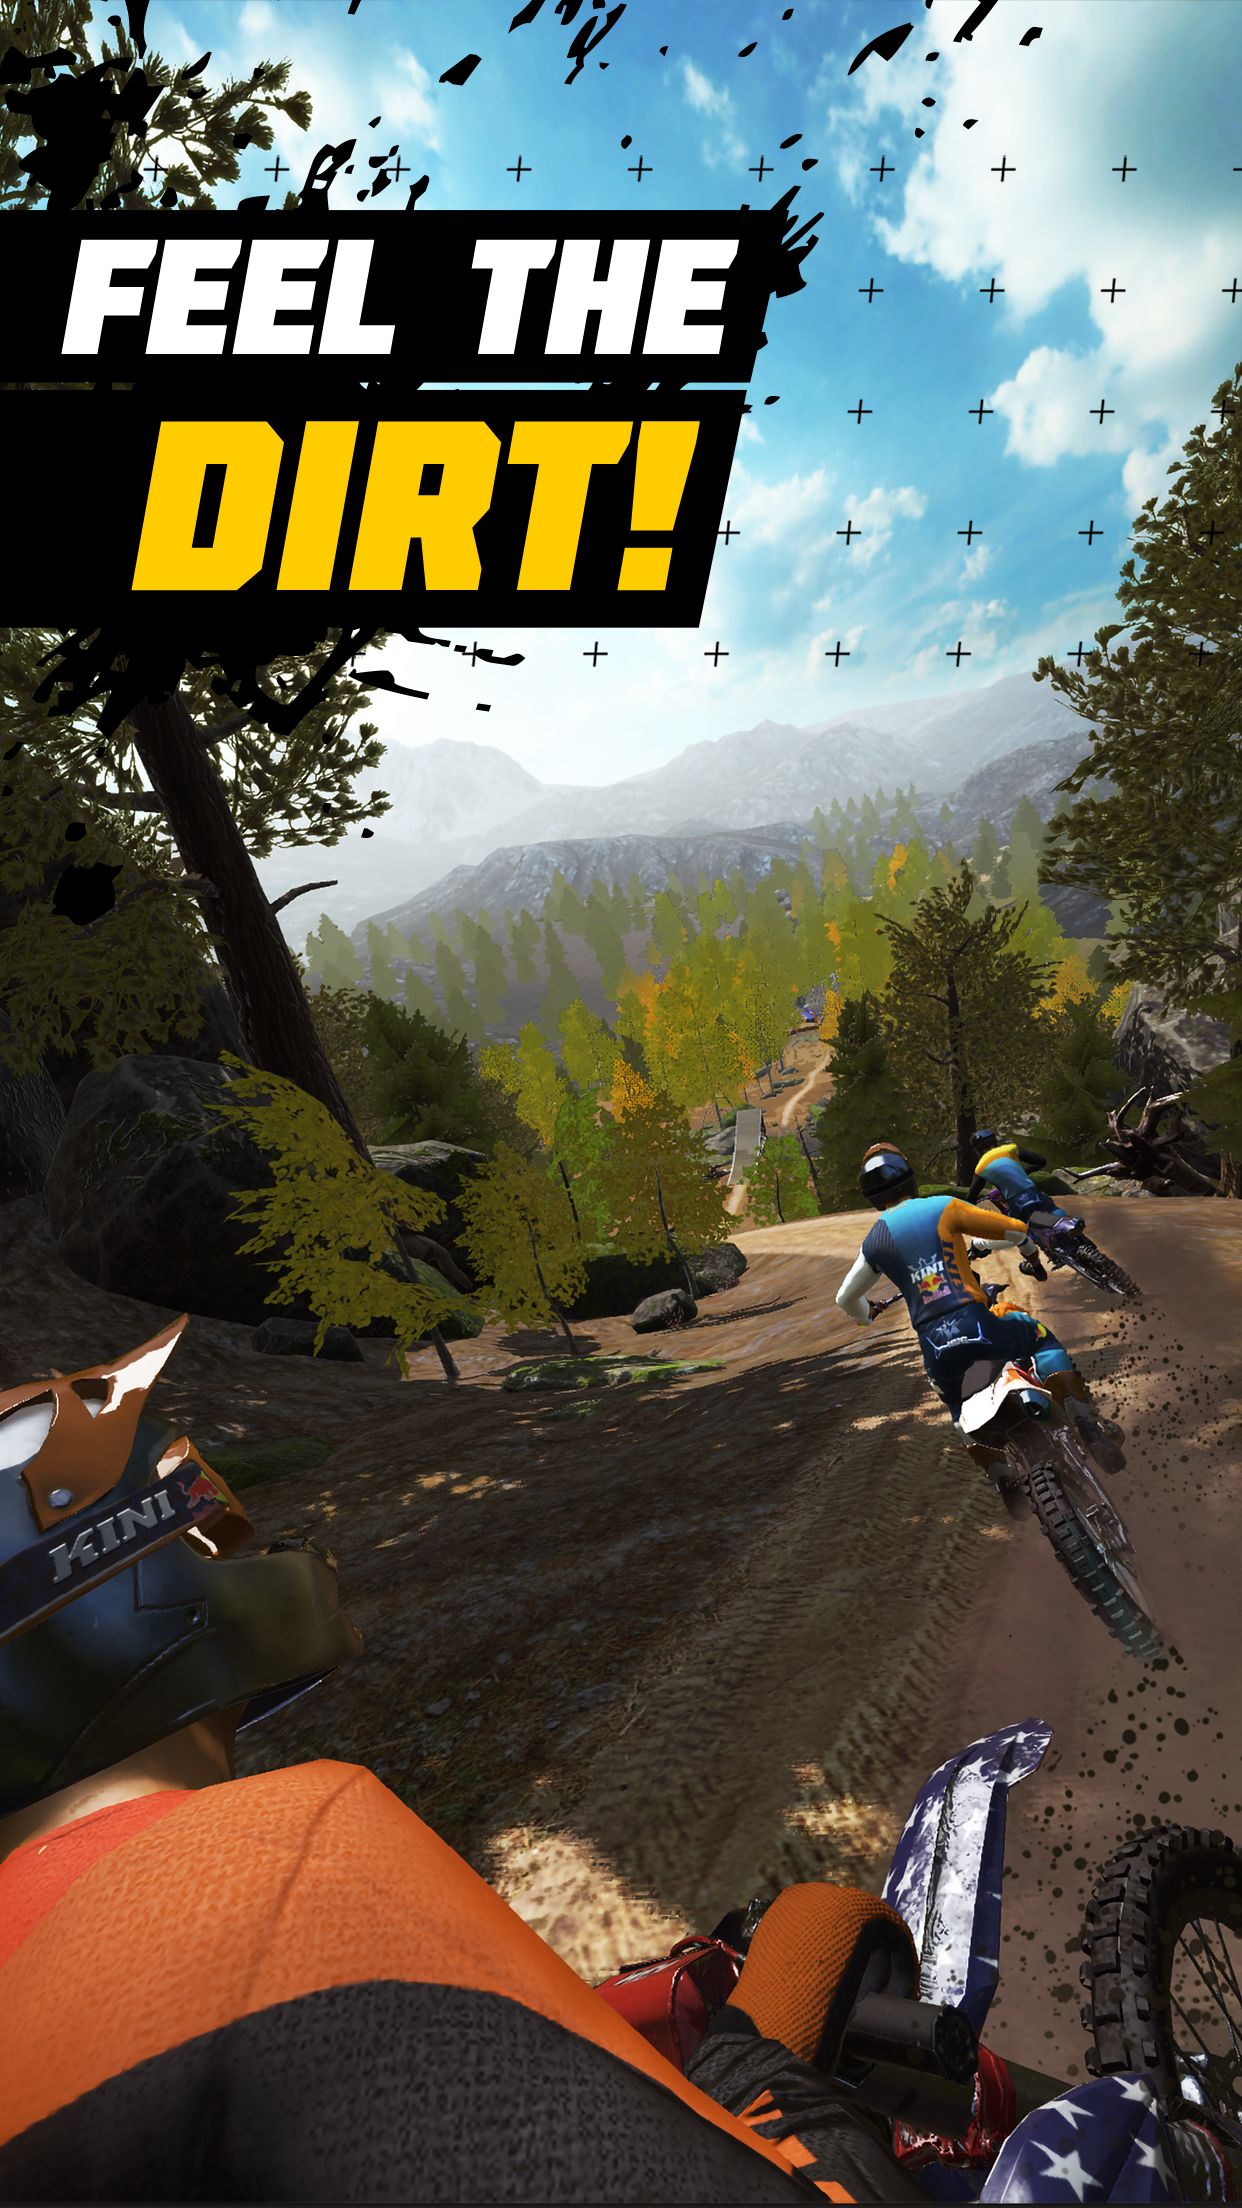 Play Dirt Bike Games Online [simulation] For Free And Unblocked